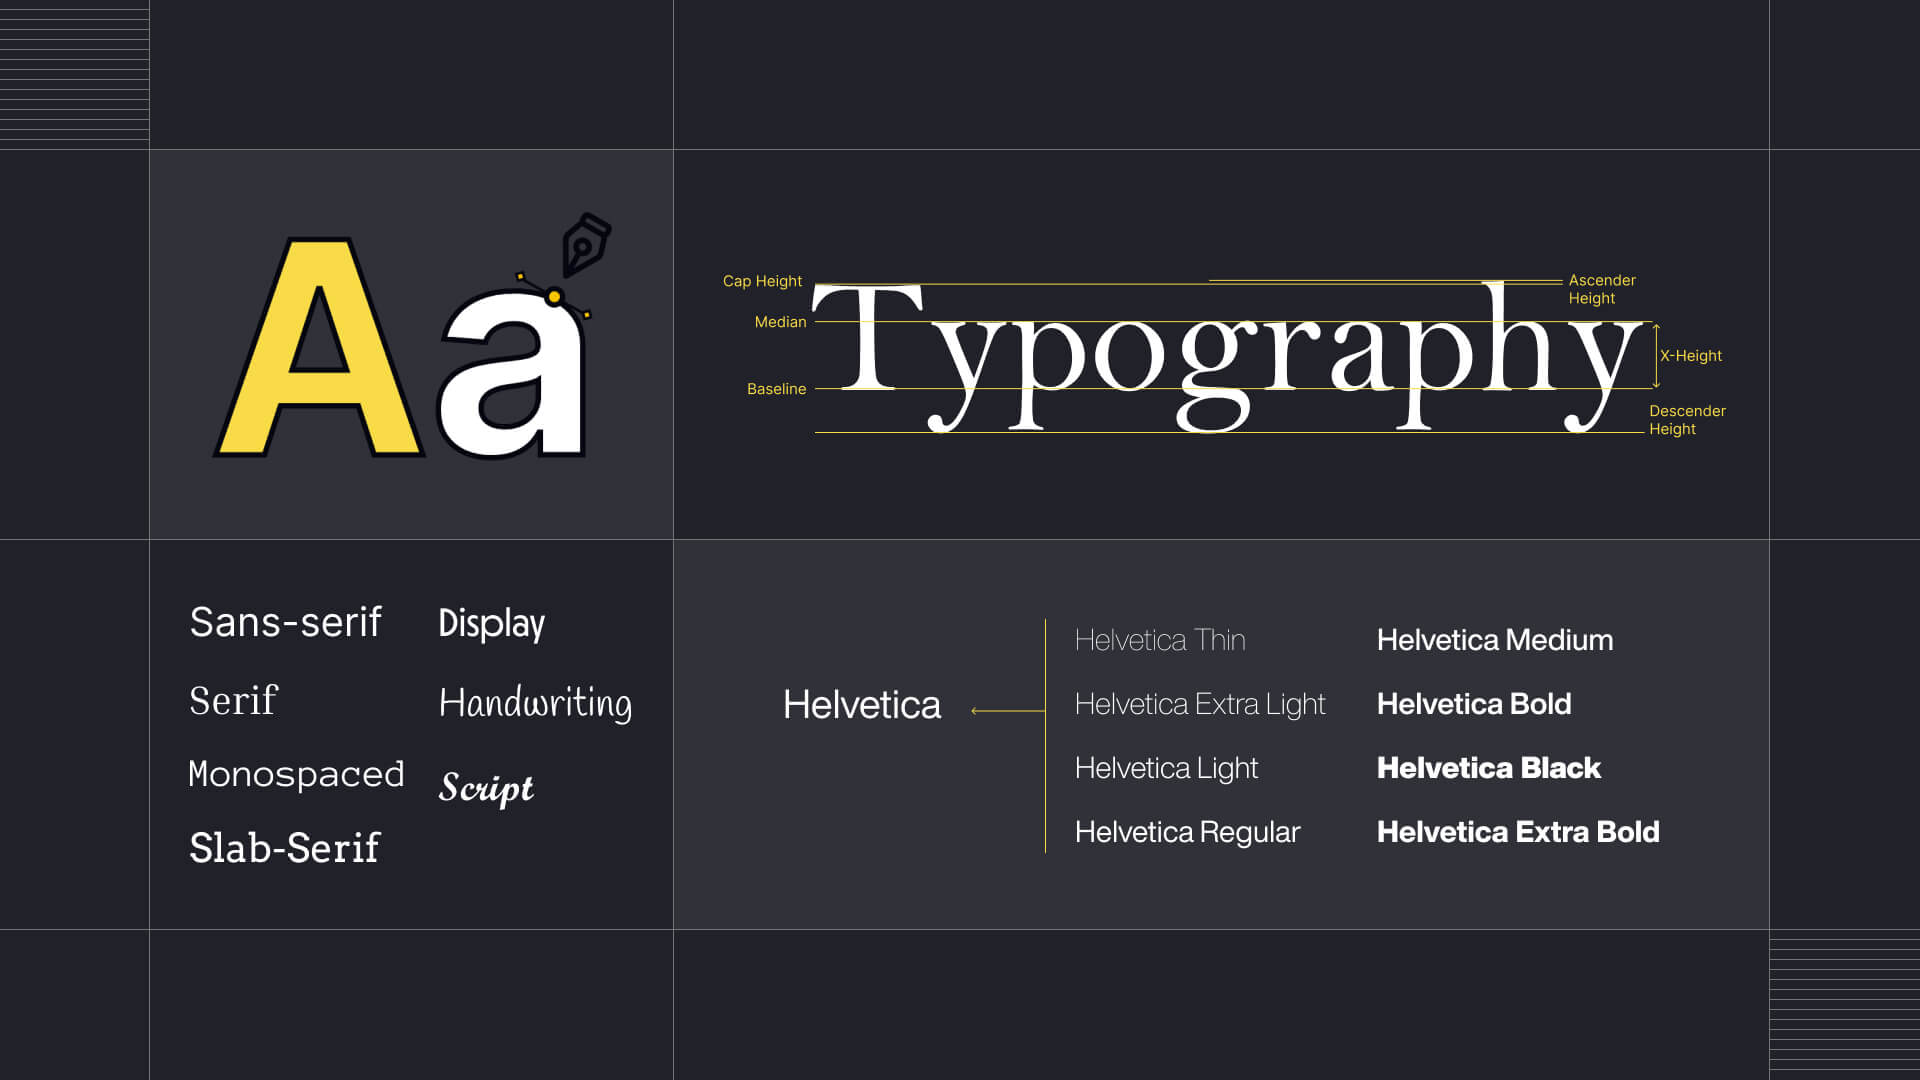 Typeface Typography and Font